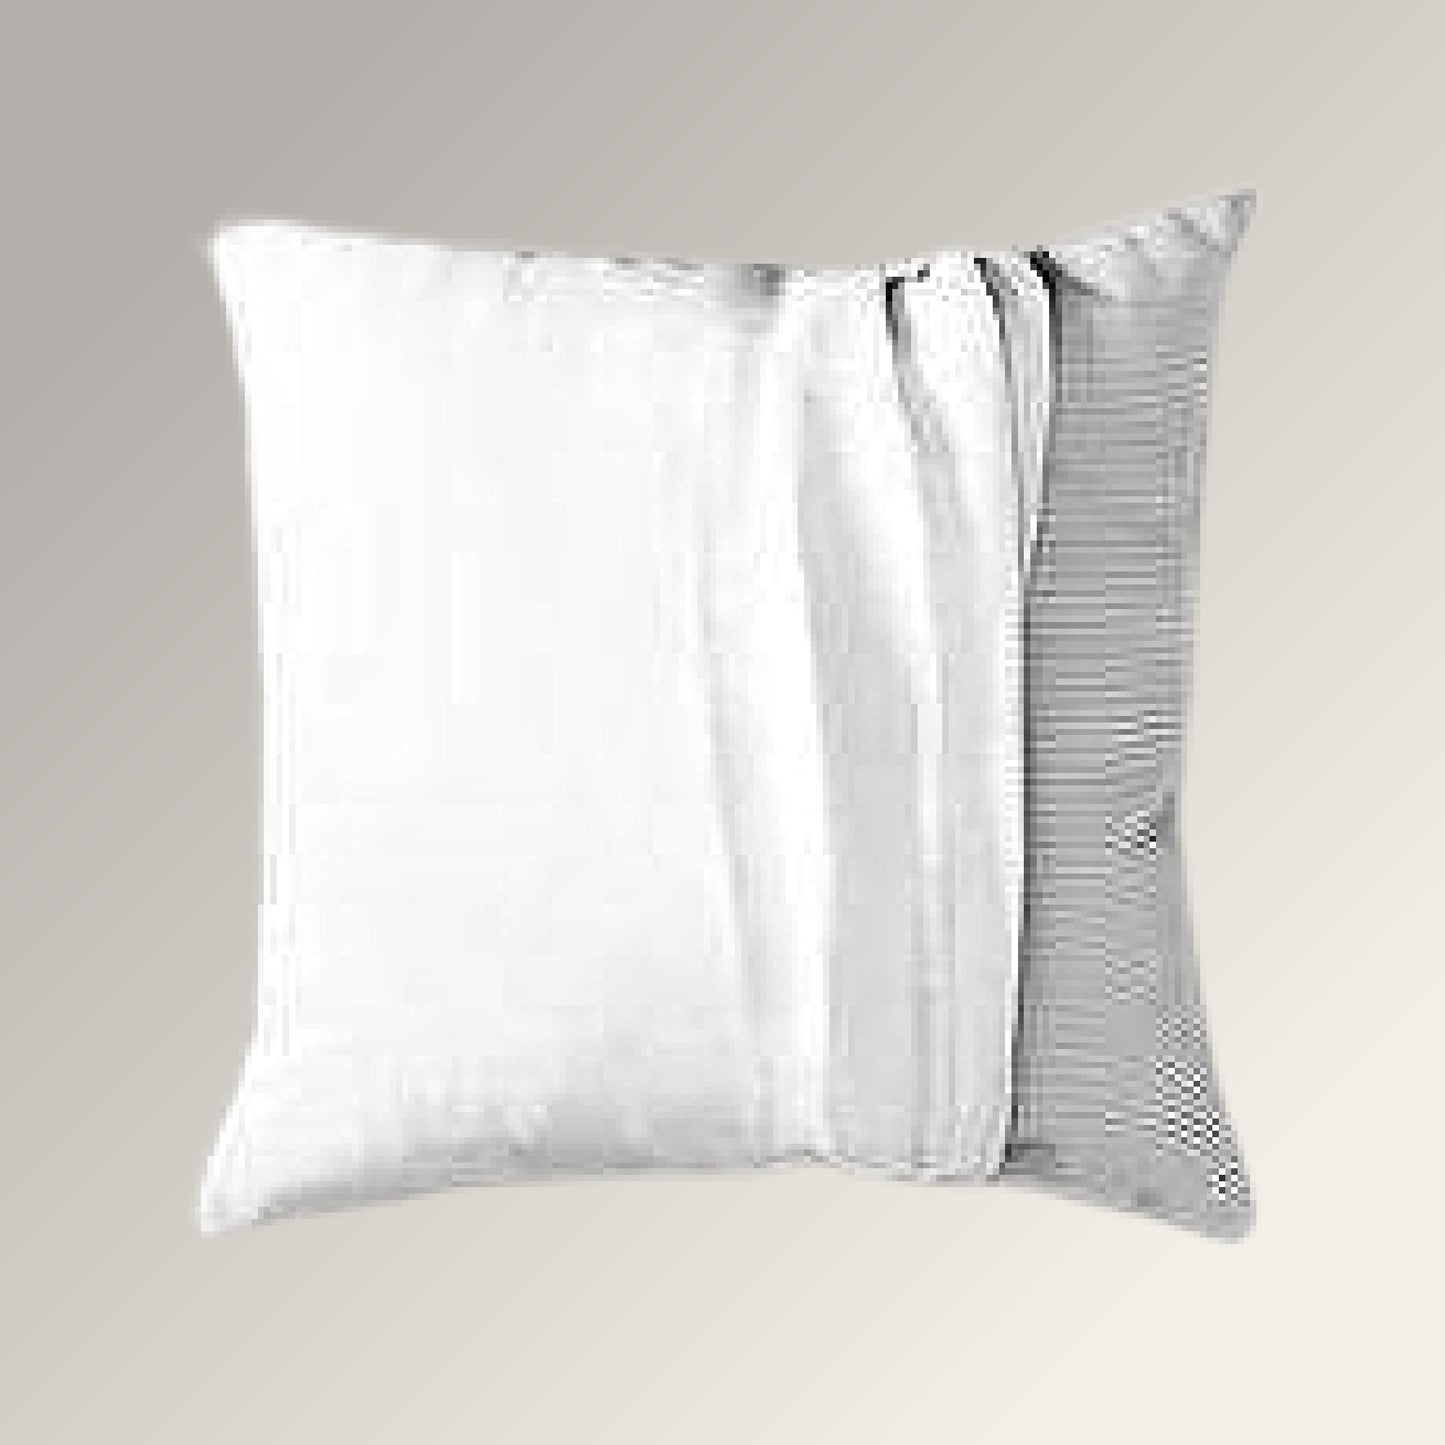 Example of how to pull a pillow case over an existing square pillow